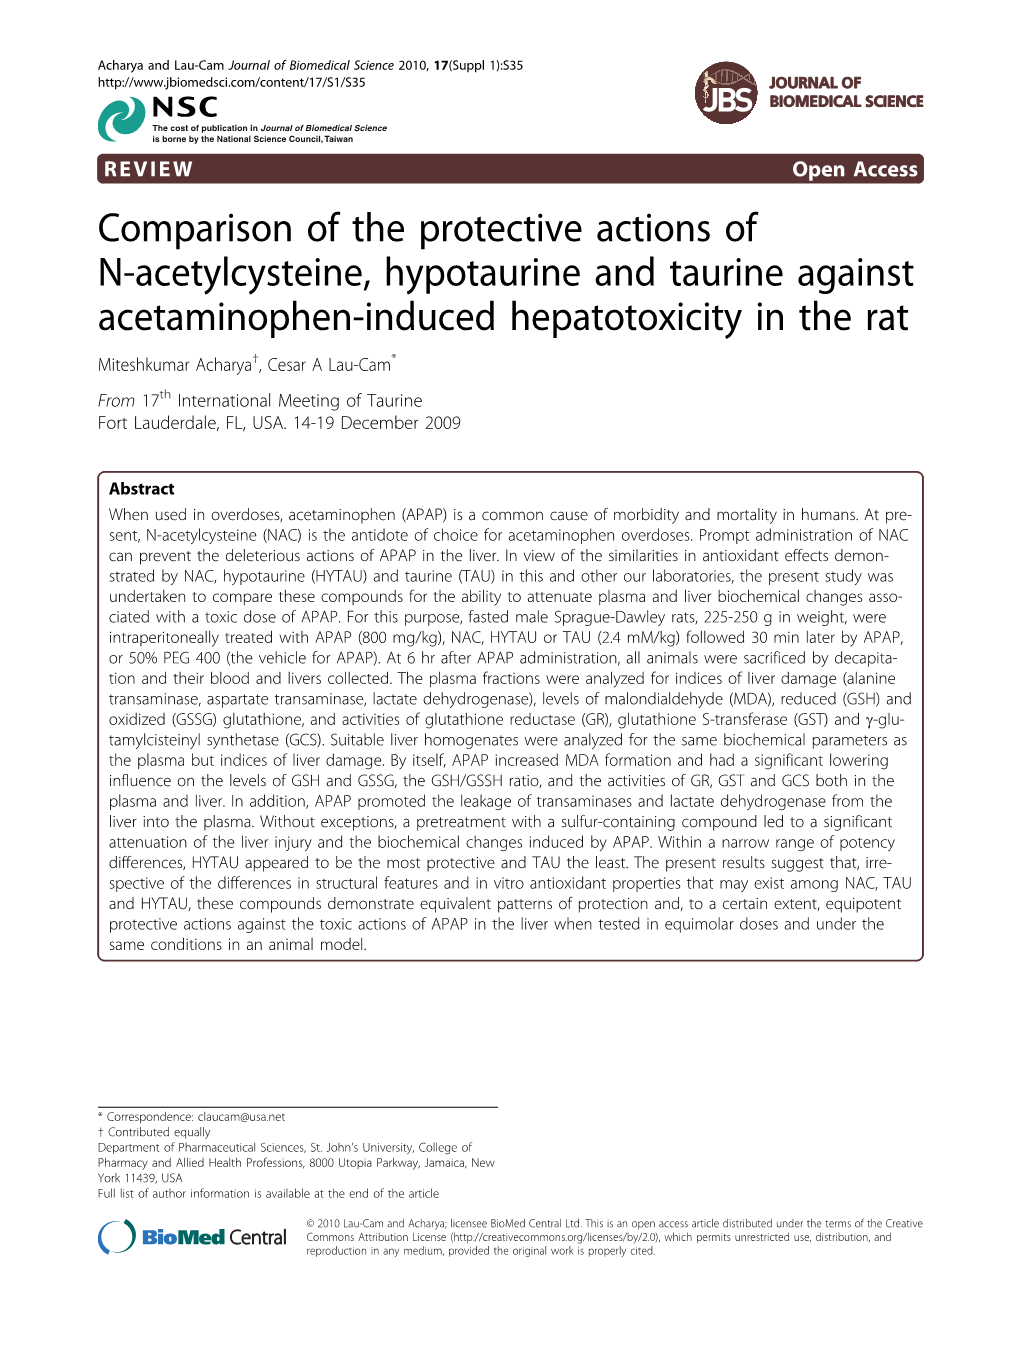 Comparison of the Protective Actions of N-Acetylcysteine, Hypotaurine